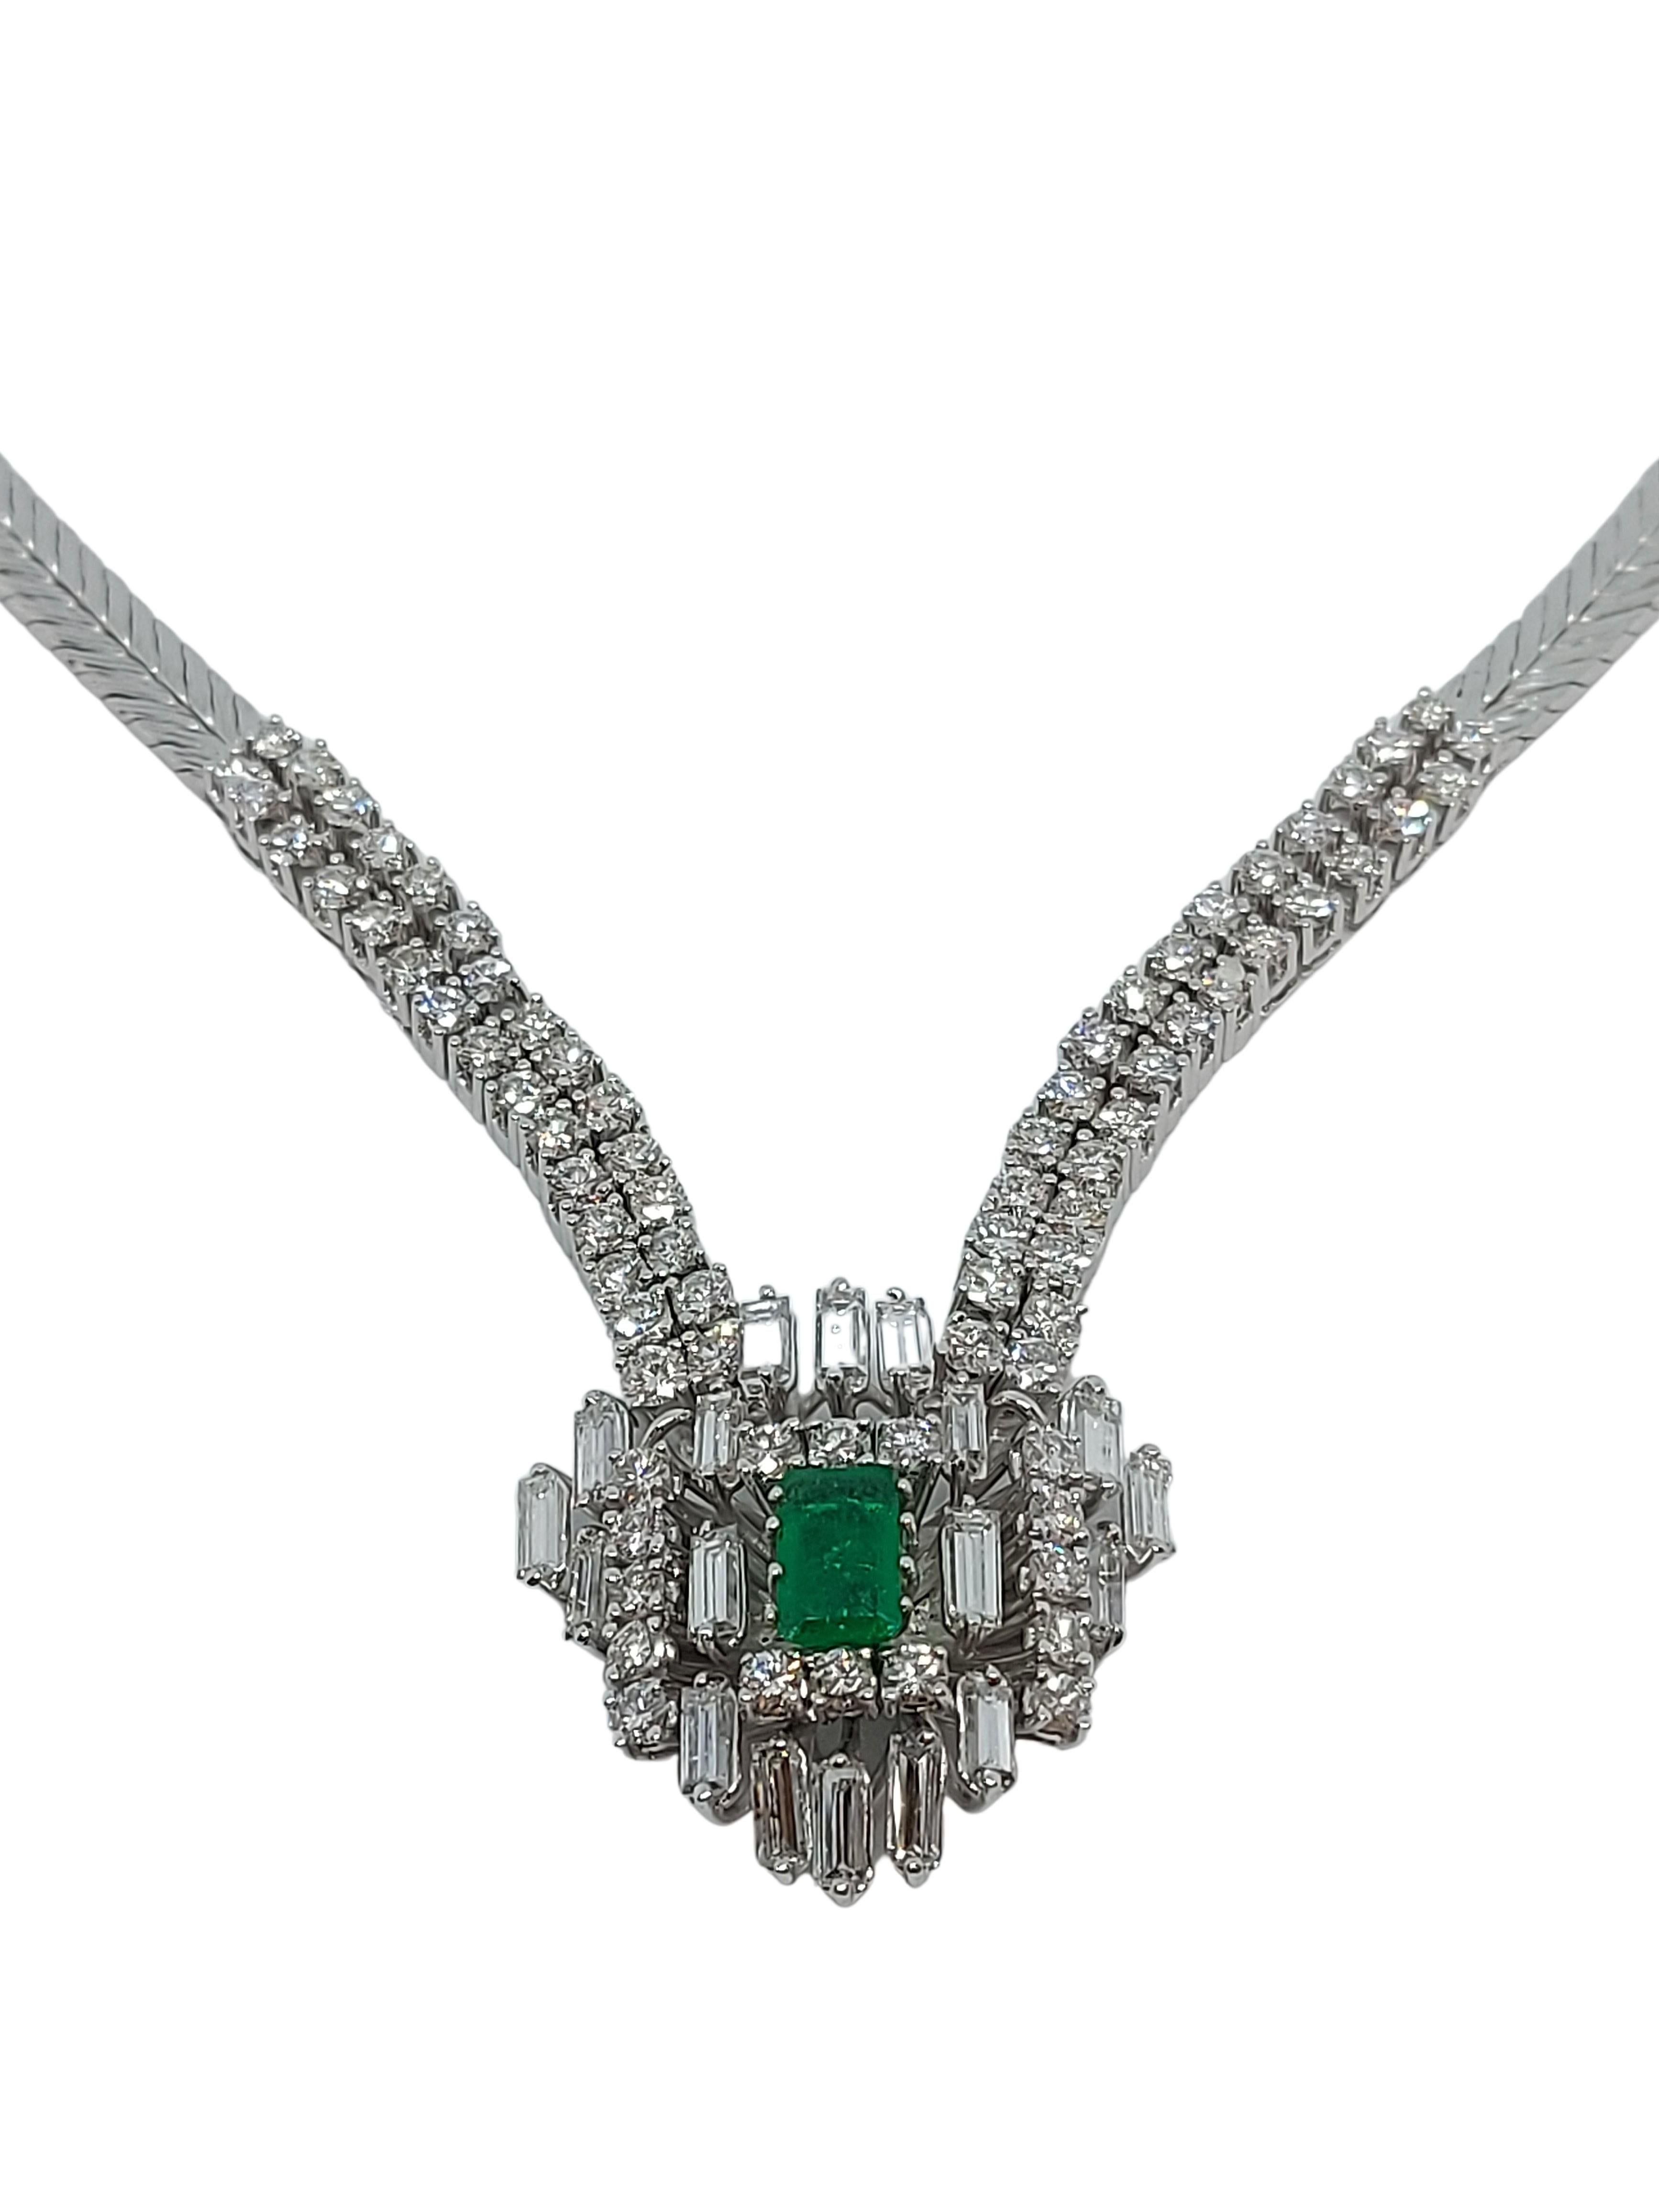 Colombian Emerald V Necklace set with Baguette and Brilliant Diamonds

Amazing eyecatching necklace (matching bracelet available) 

Emerald: 5.3 x 8.3 mm

Diamonds: 72° brilliant cut diamonds Total of 5.3 Ct ,E/F VVS

18 baguette cut diamonds ,3.84